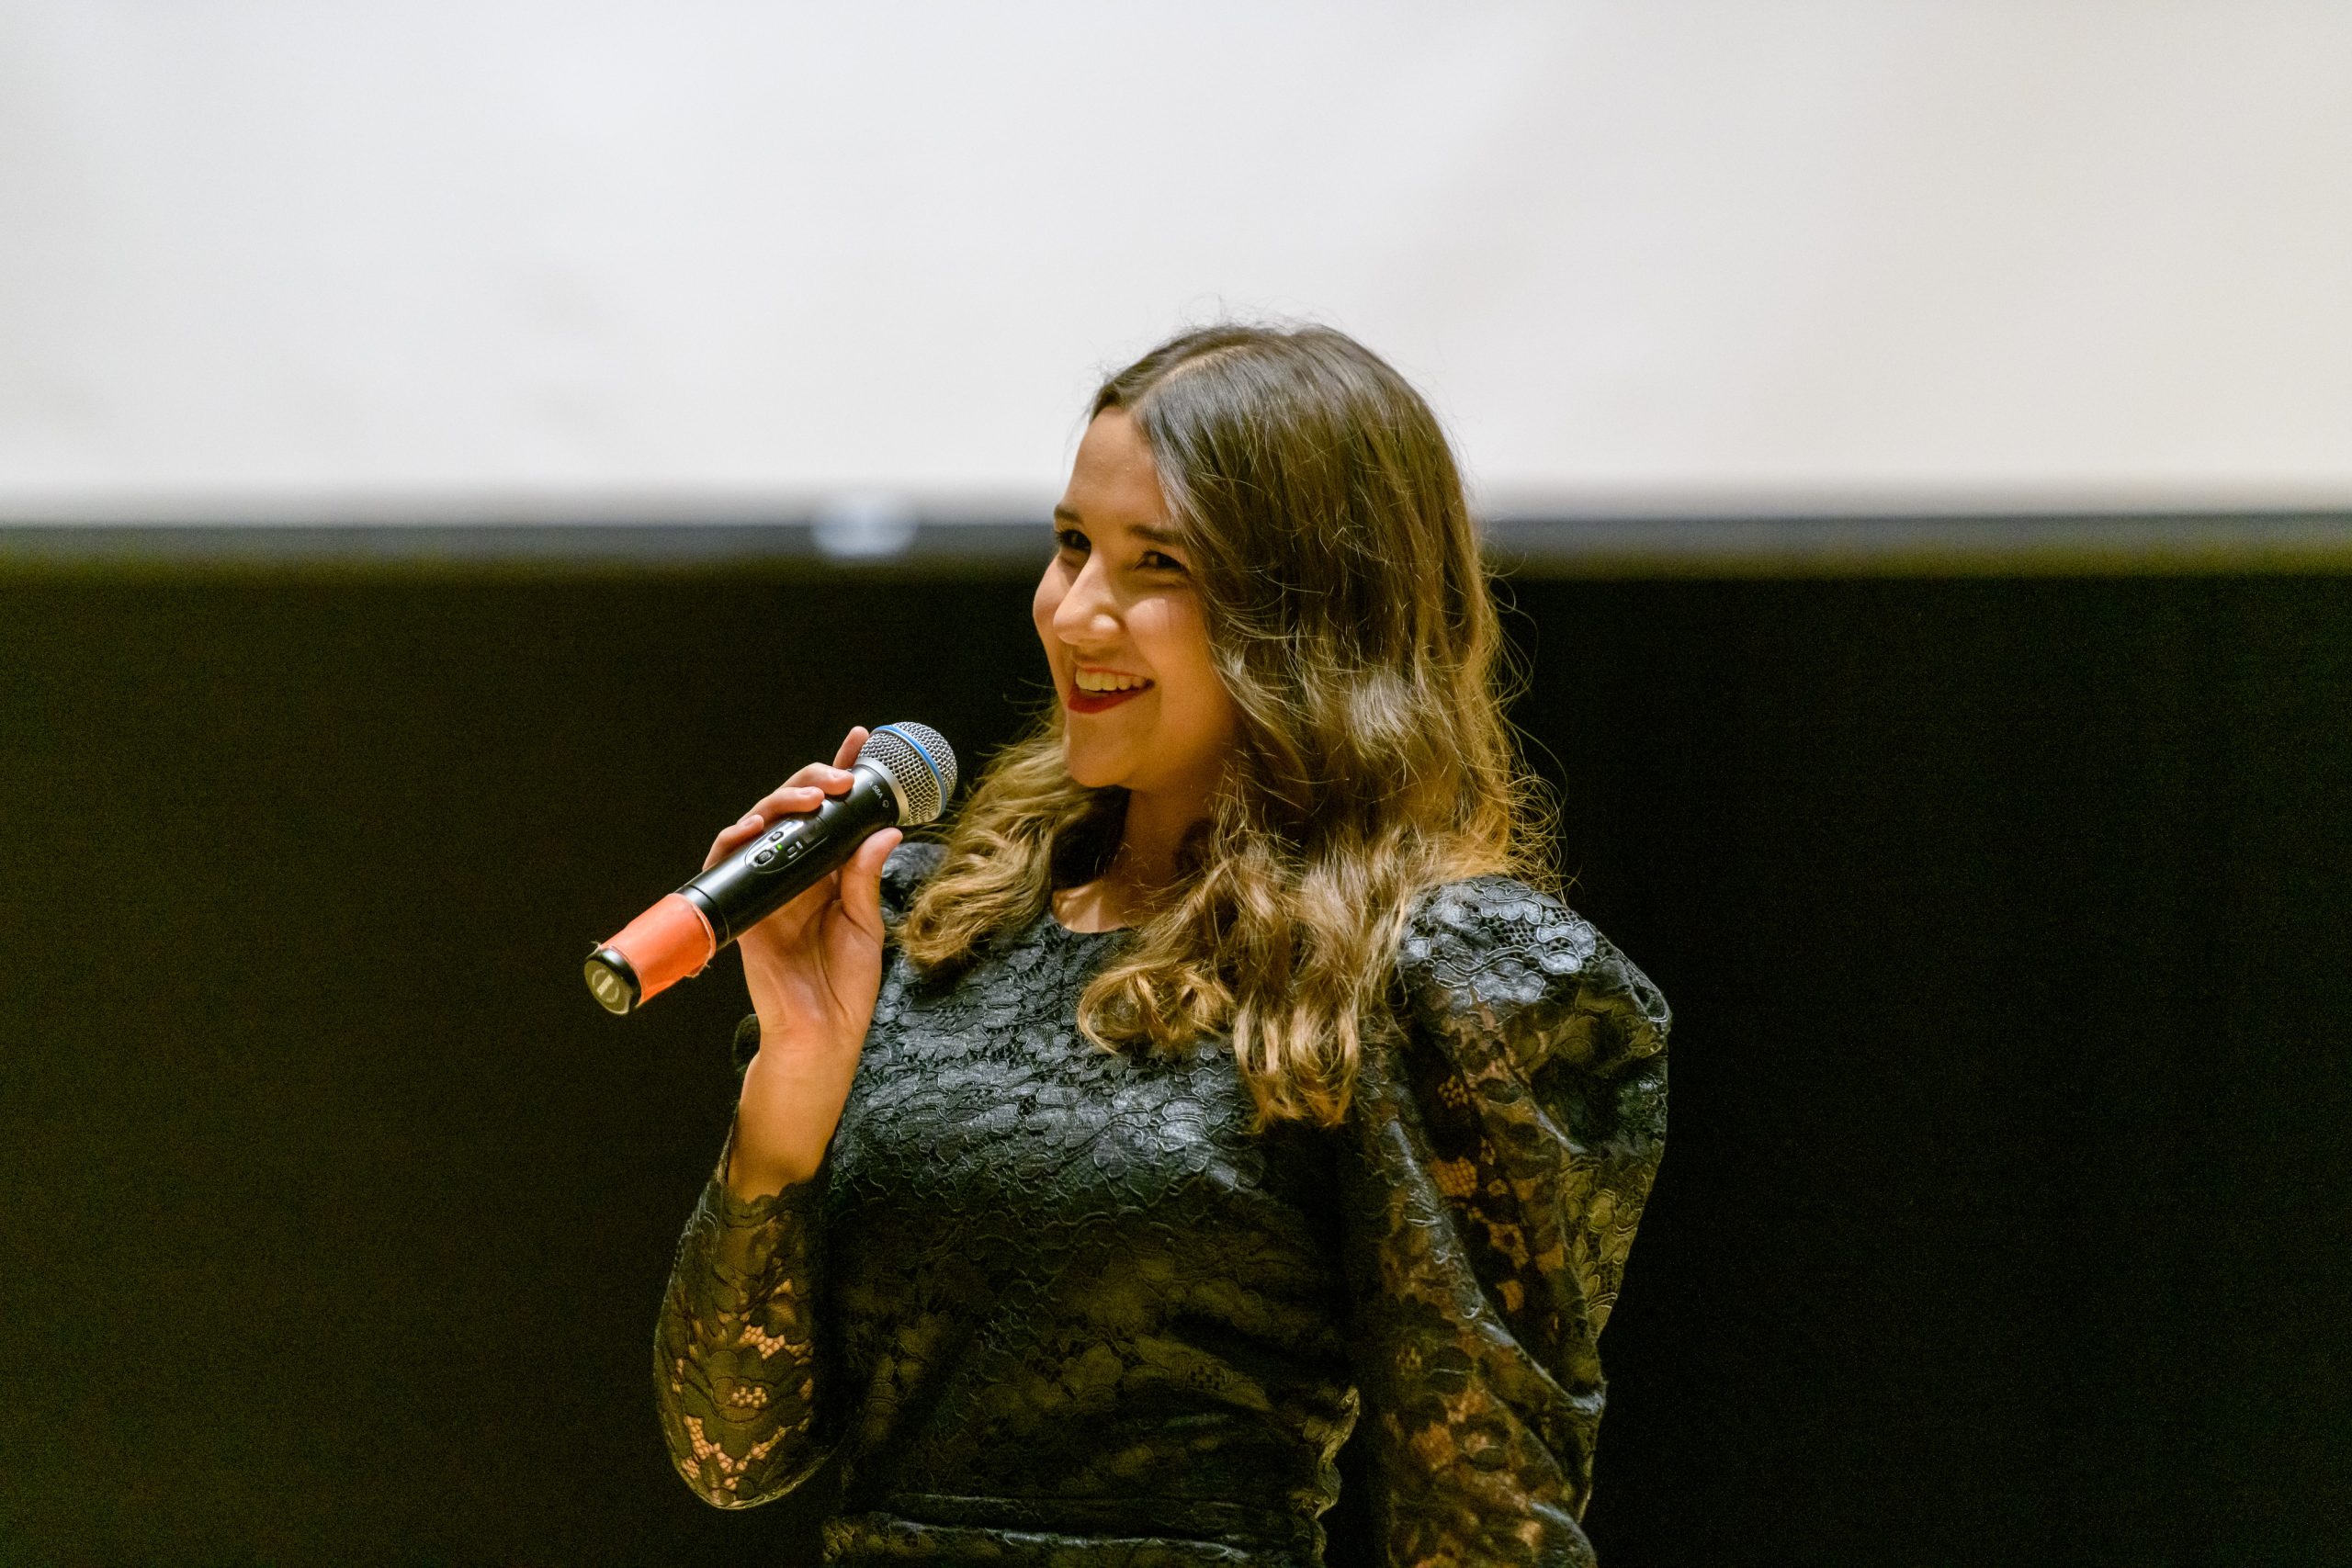 A young woman smiling on a stage with a microphone in her hand